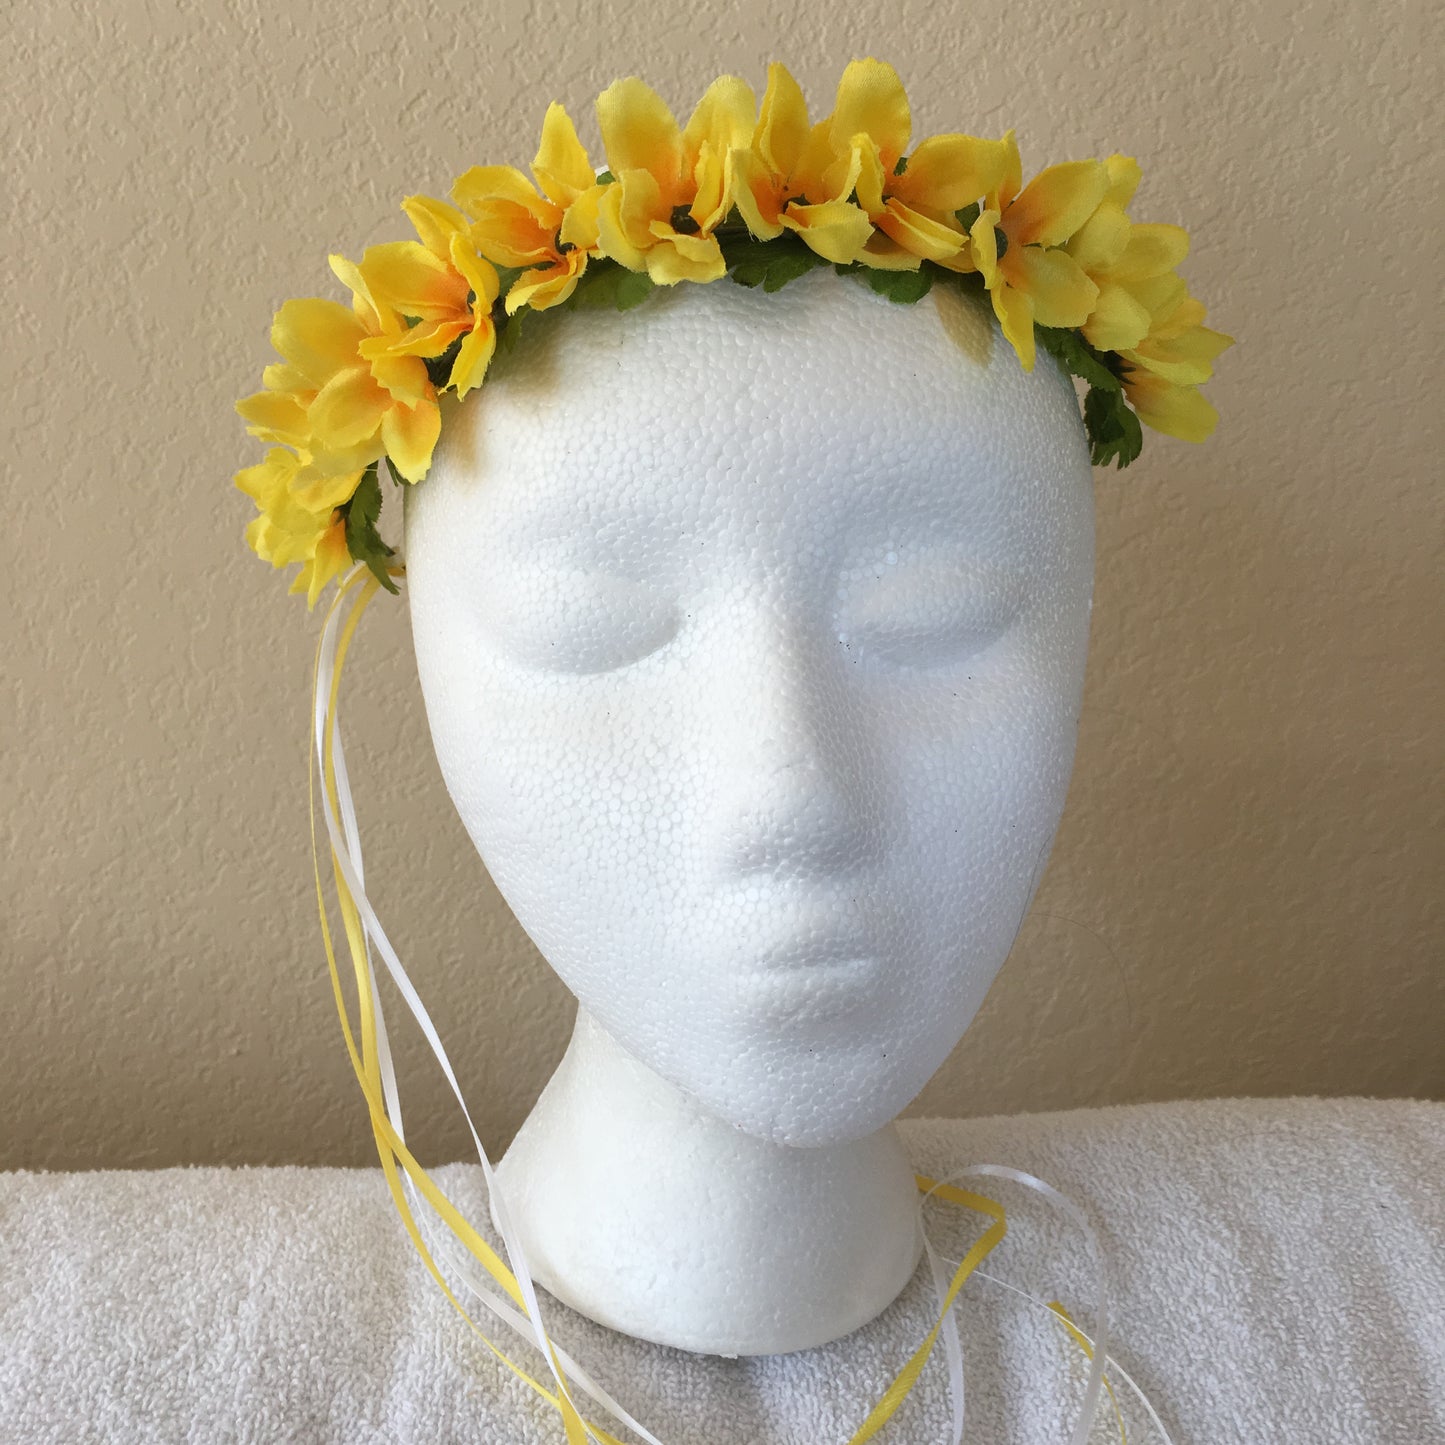 Extra Small Wreath - Bright yellow flowers